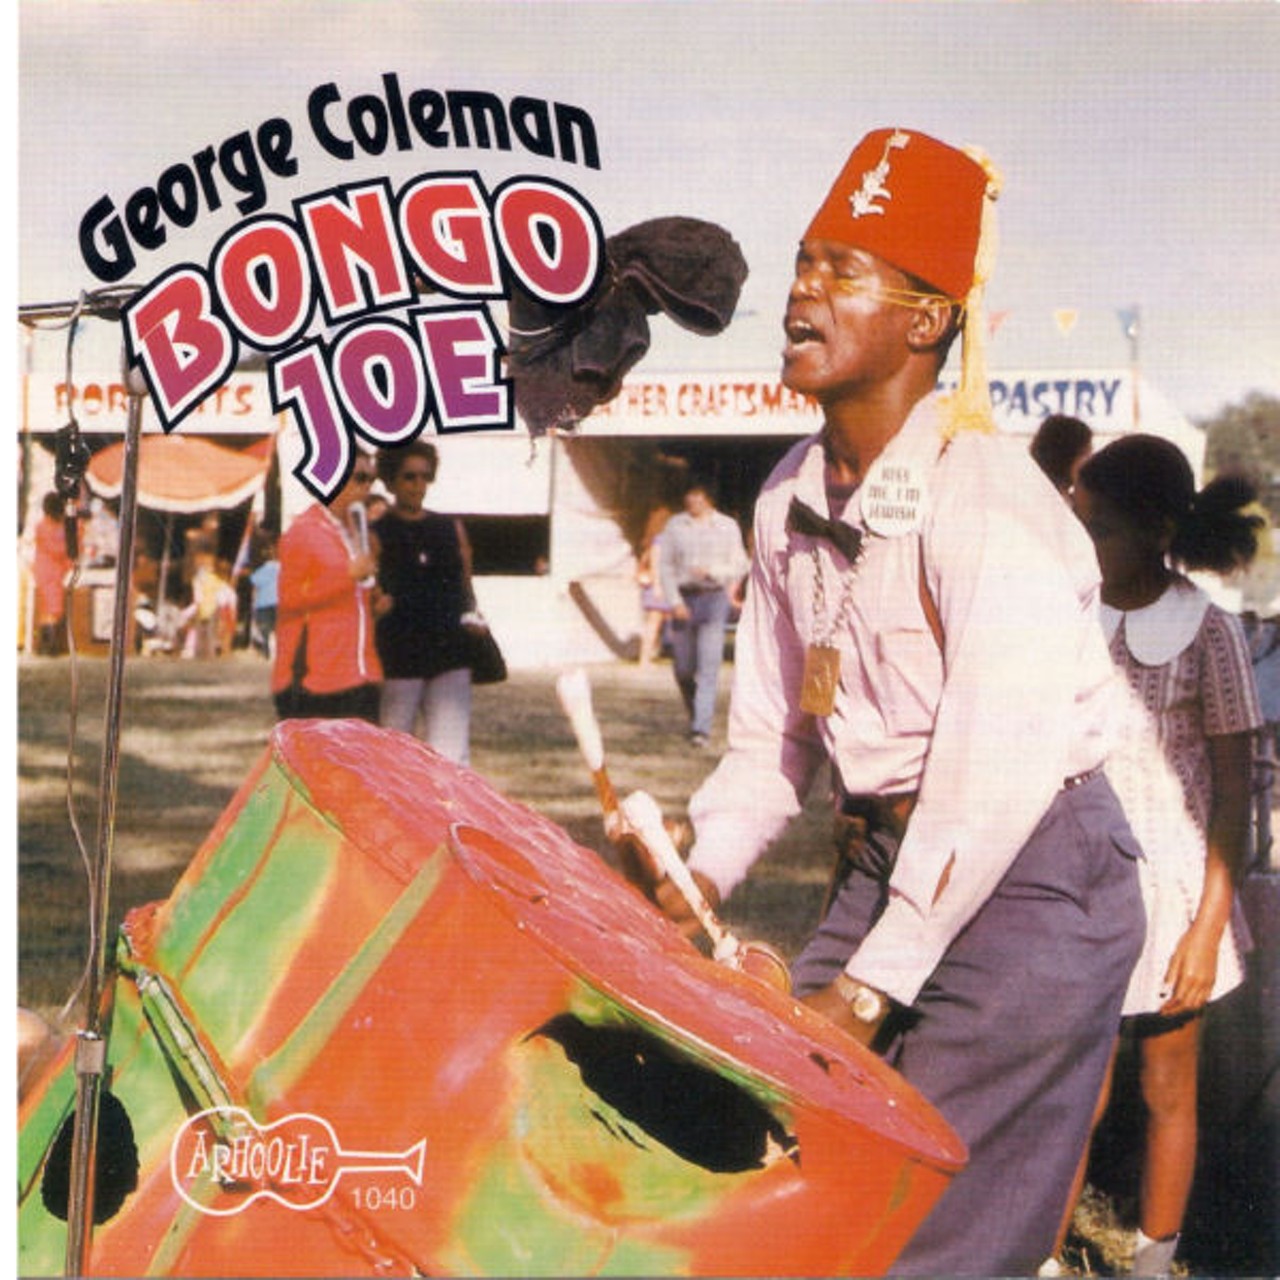 George Coleman: "Bongo Joe"
San Antonio street musician George "Bongo Joe" Coleman was known for his use of a makeshift percussion kit made out of salvaged oil drums. He recorded his sole album in the Alamo City in 1968 and it remains a classic of inspired outsider art.
Photo via Arhoolie Records